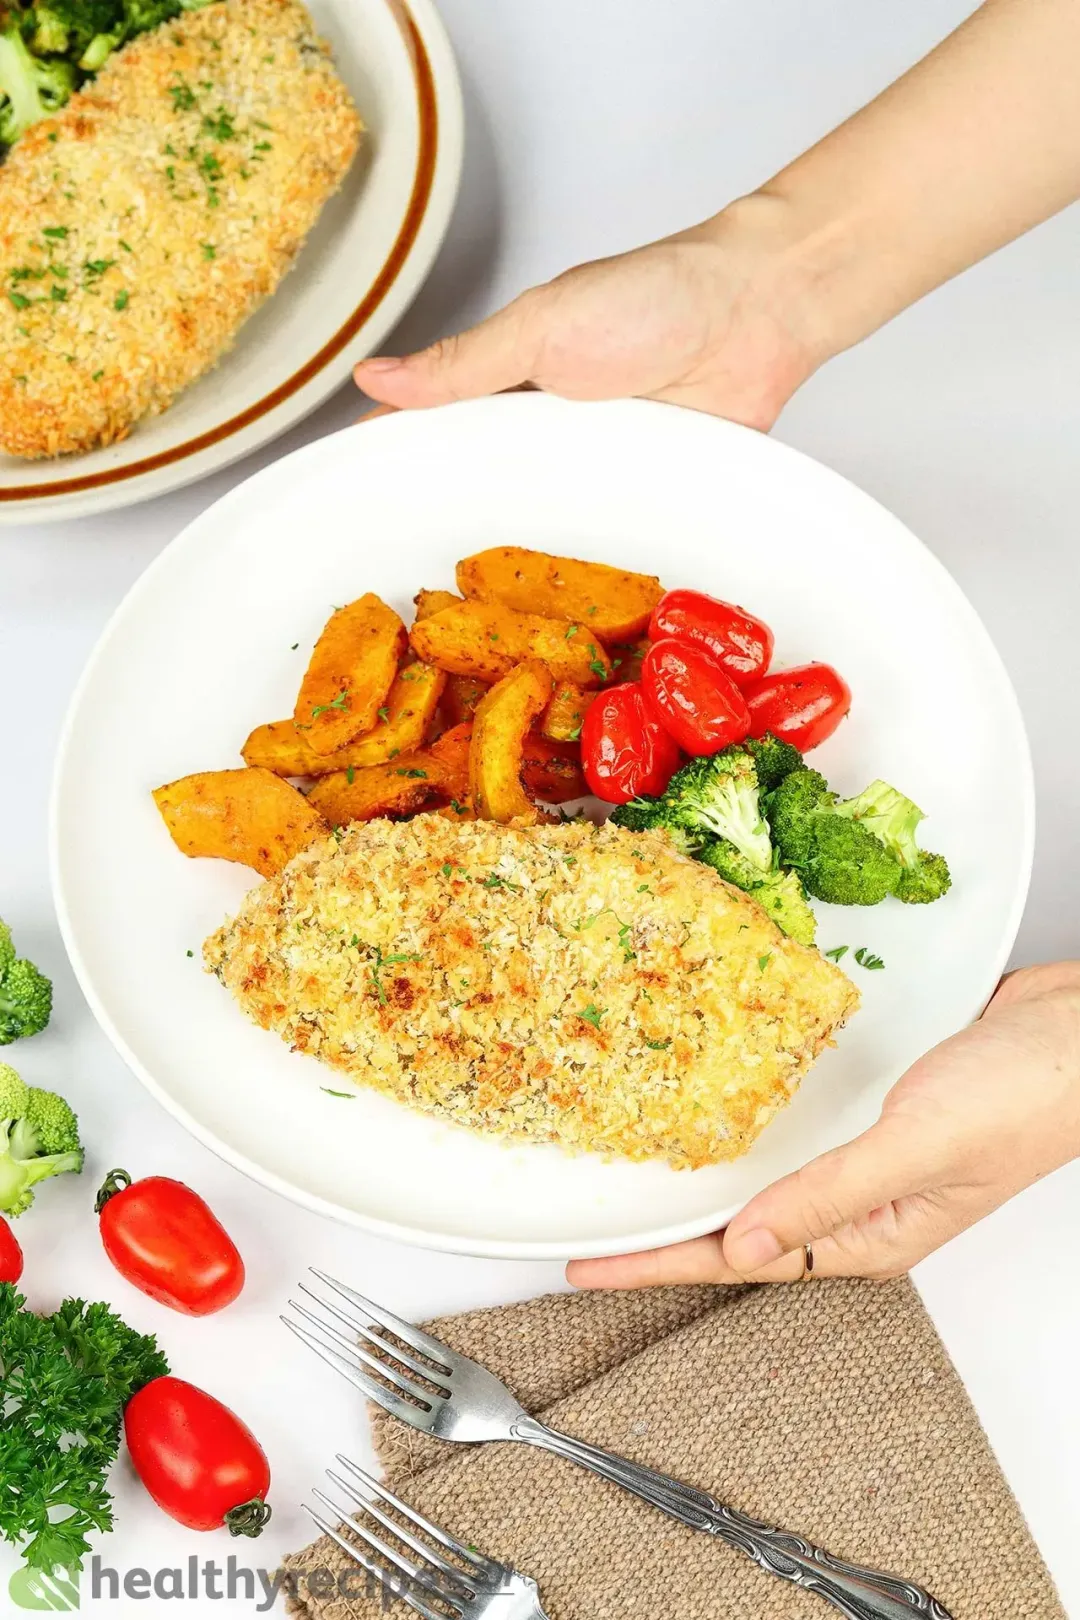 What to Serve With Panko crusted Sea Bass